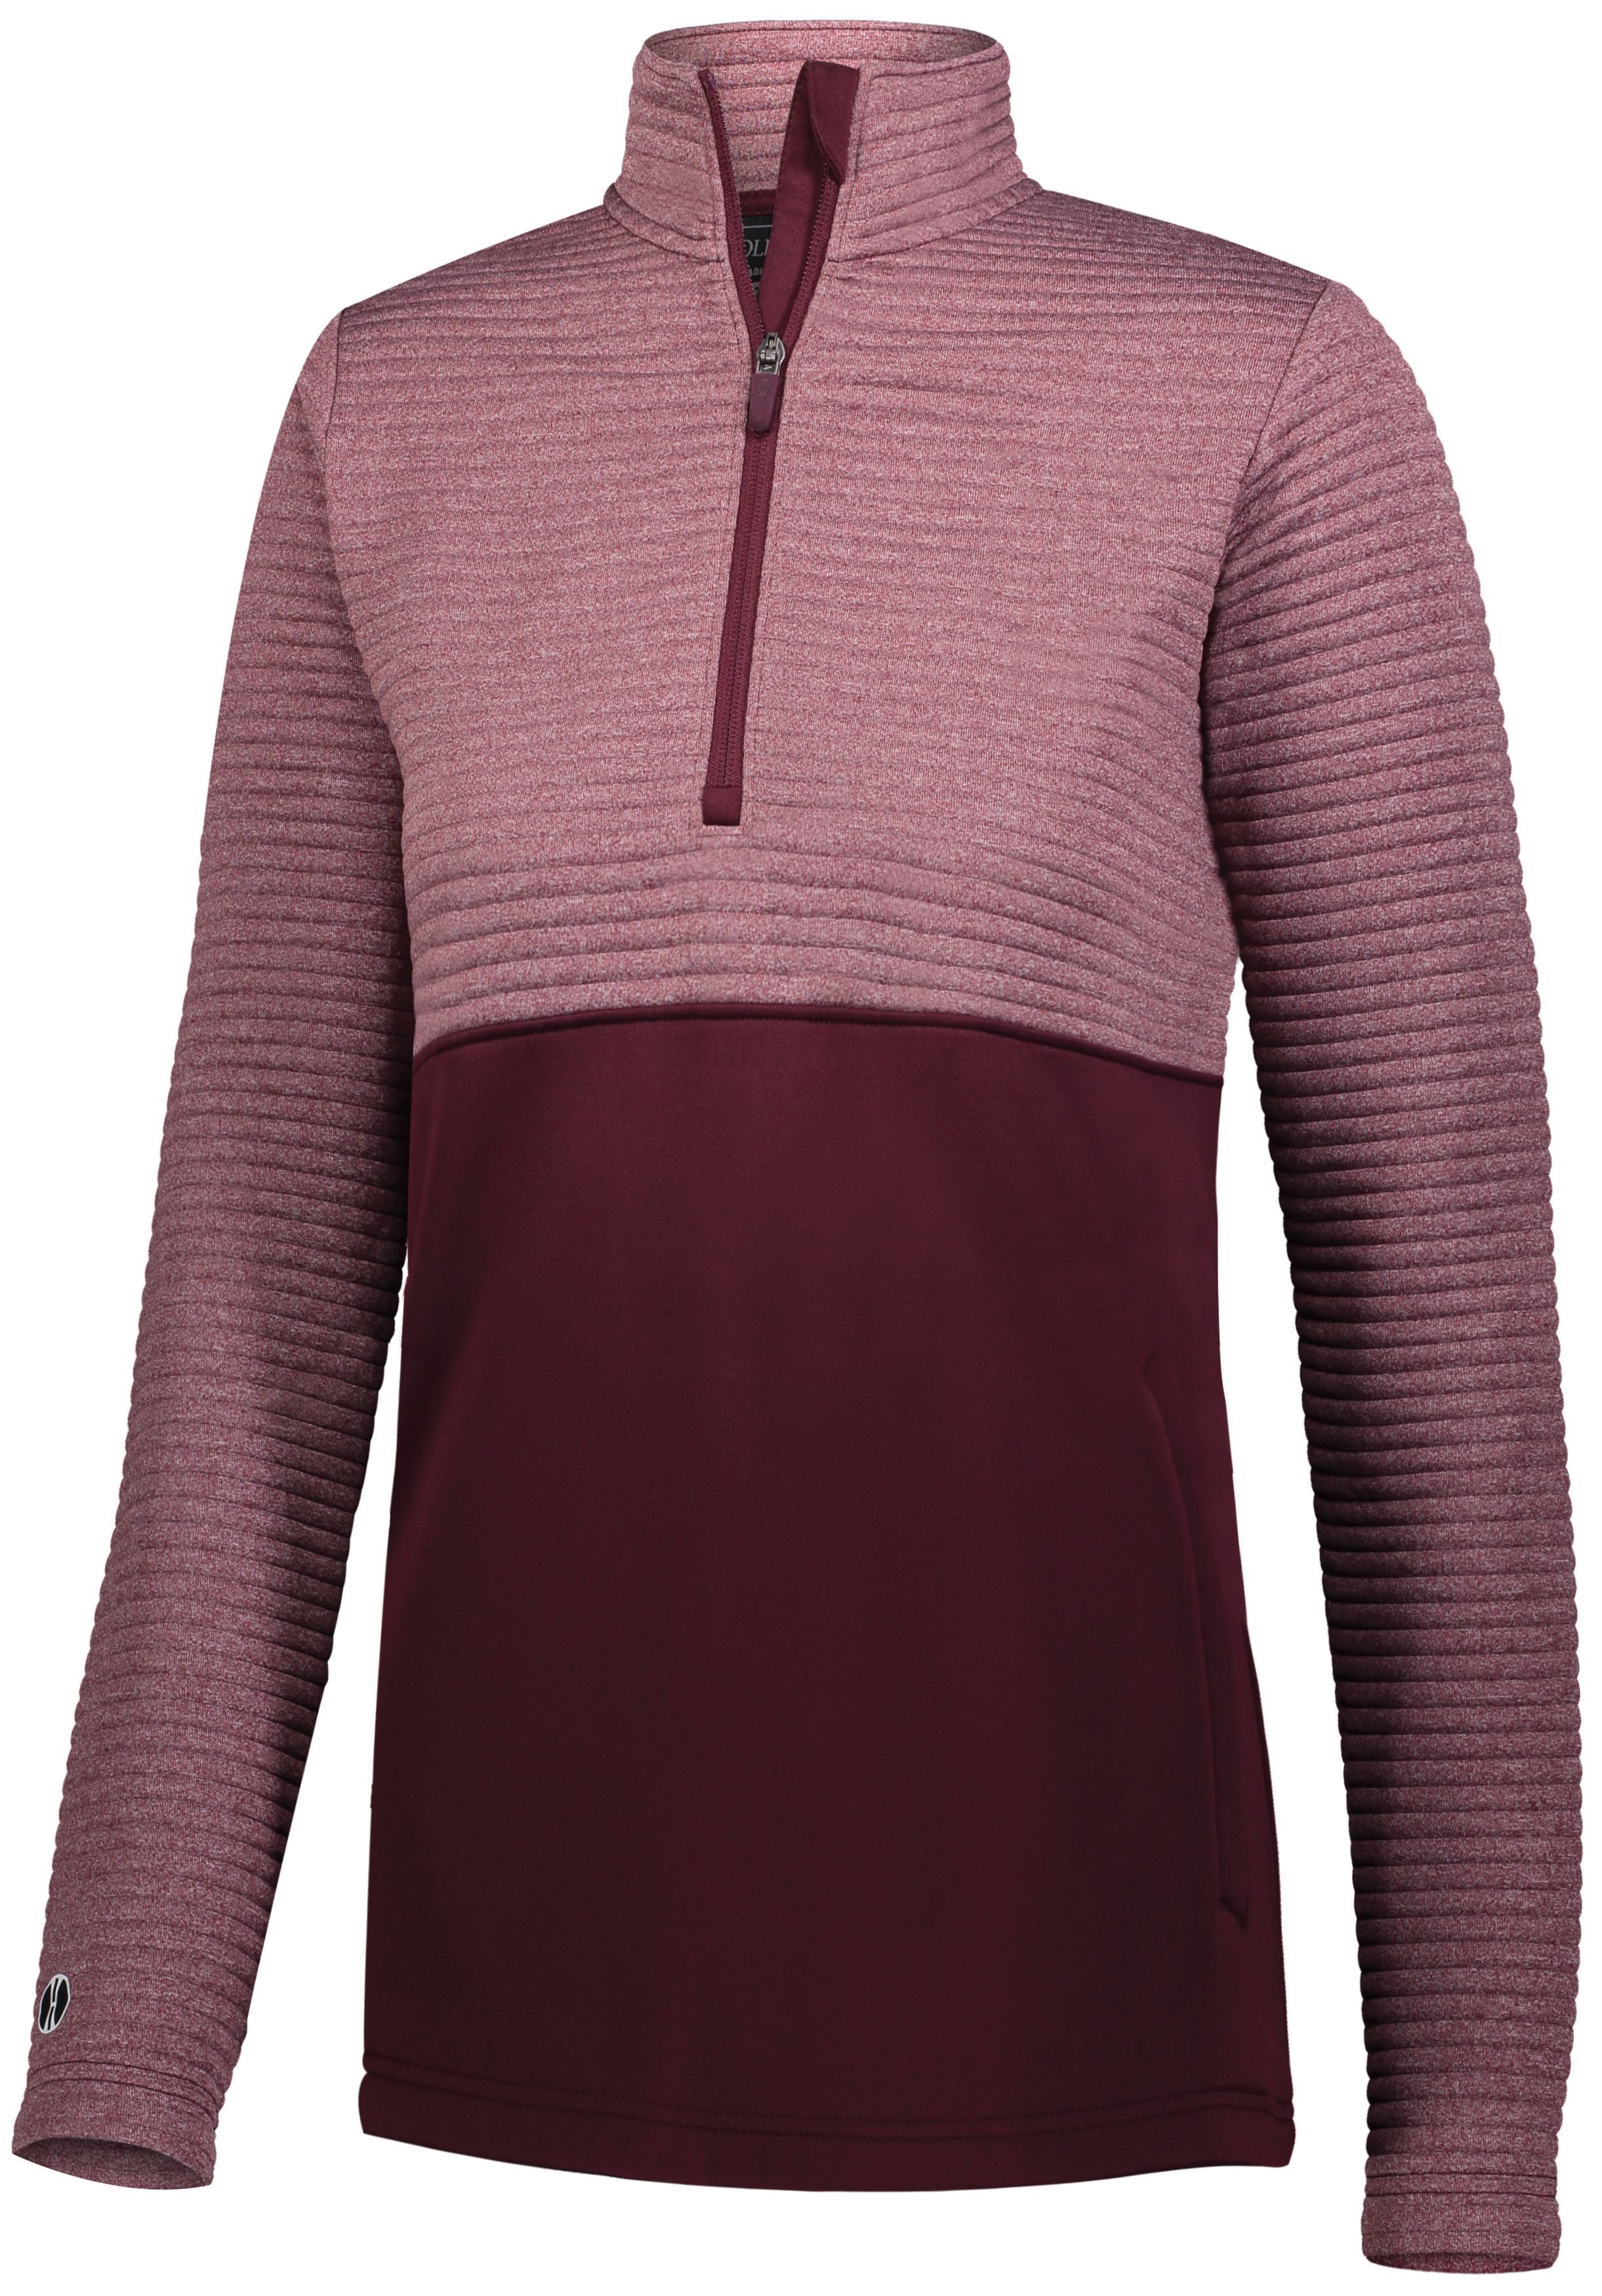 click to view Maroon Heather/Maroon